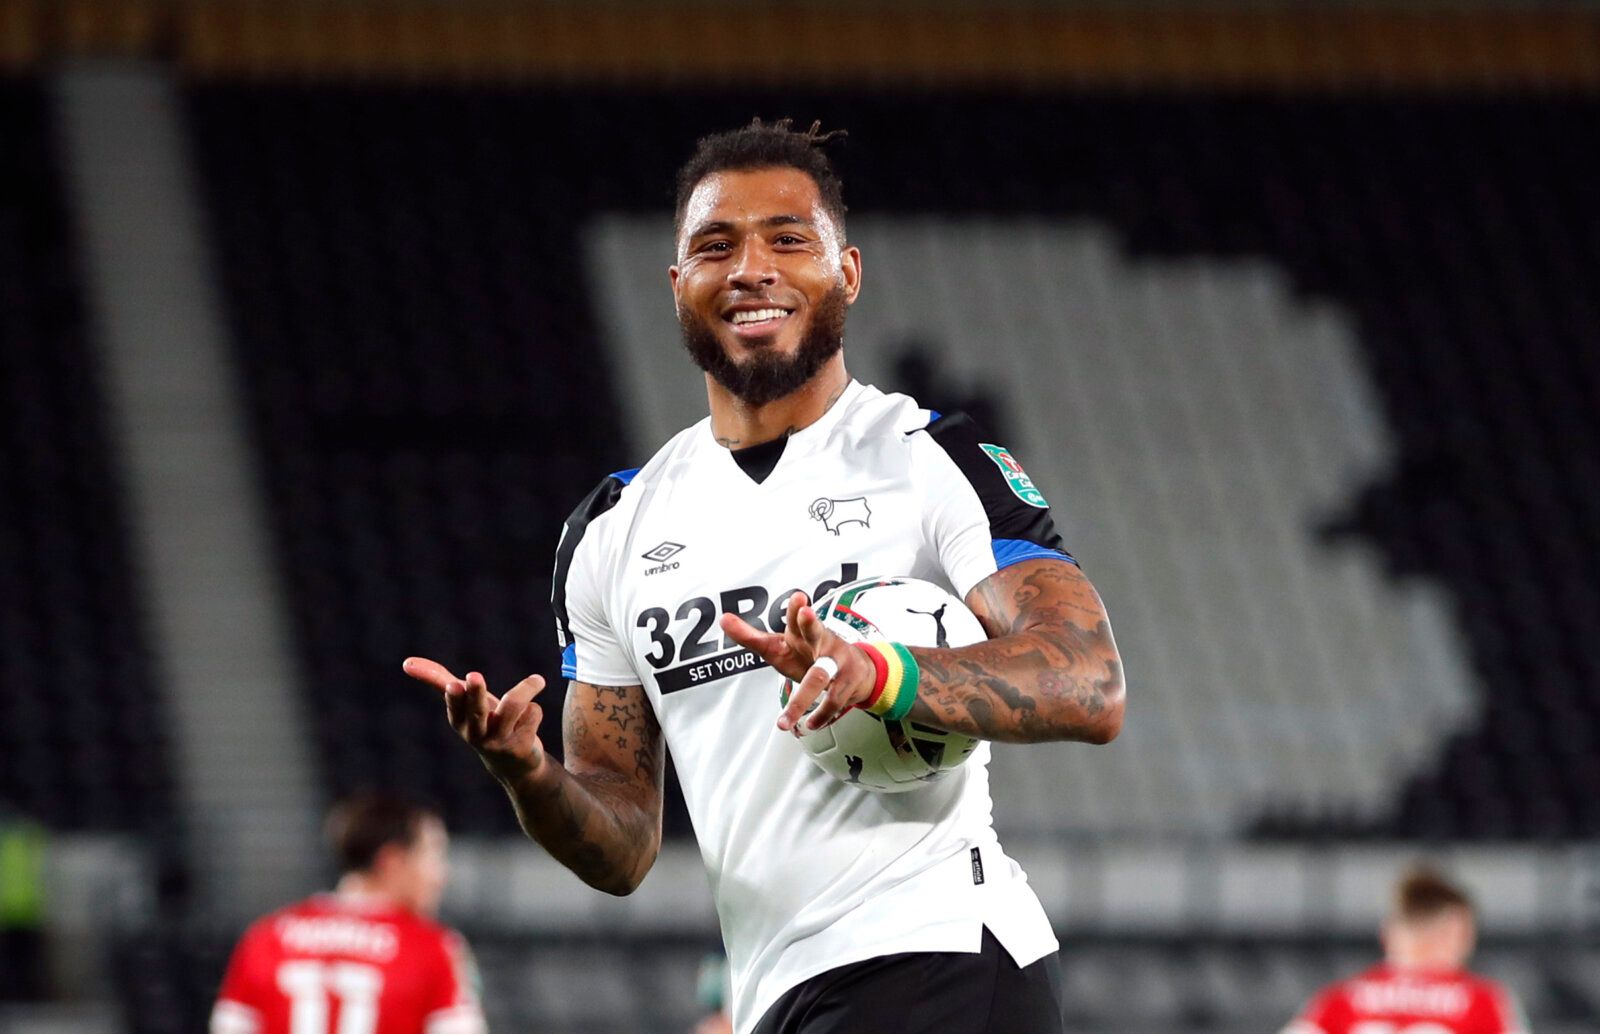 Soccer Football - Carabao Cup - First Round - Derby County v Salford City - Pride Park, Derby, Britain - August 10, 2021 Derby County’s Colin Kazim Richards celebrates scoring their second goal Action Images/Peter Cziborra EDITORIAL USE ONLY. No use with unauthorized audio, video, data, fixture lists, club/league logos or 'live' services. Online in-match use limited to 75 images, no video emulation. No use in betting, games or single club /league/player publications.  Please contact your account